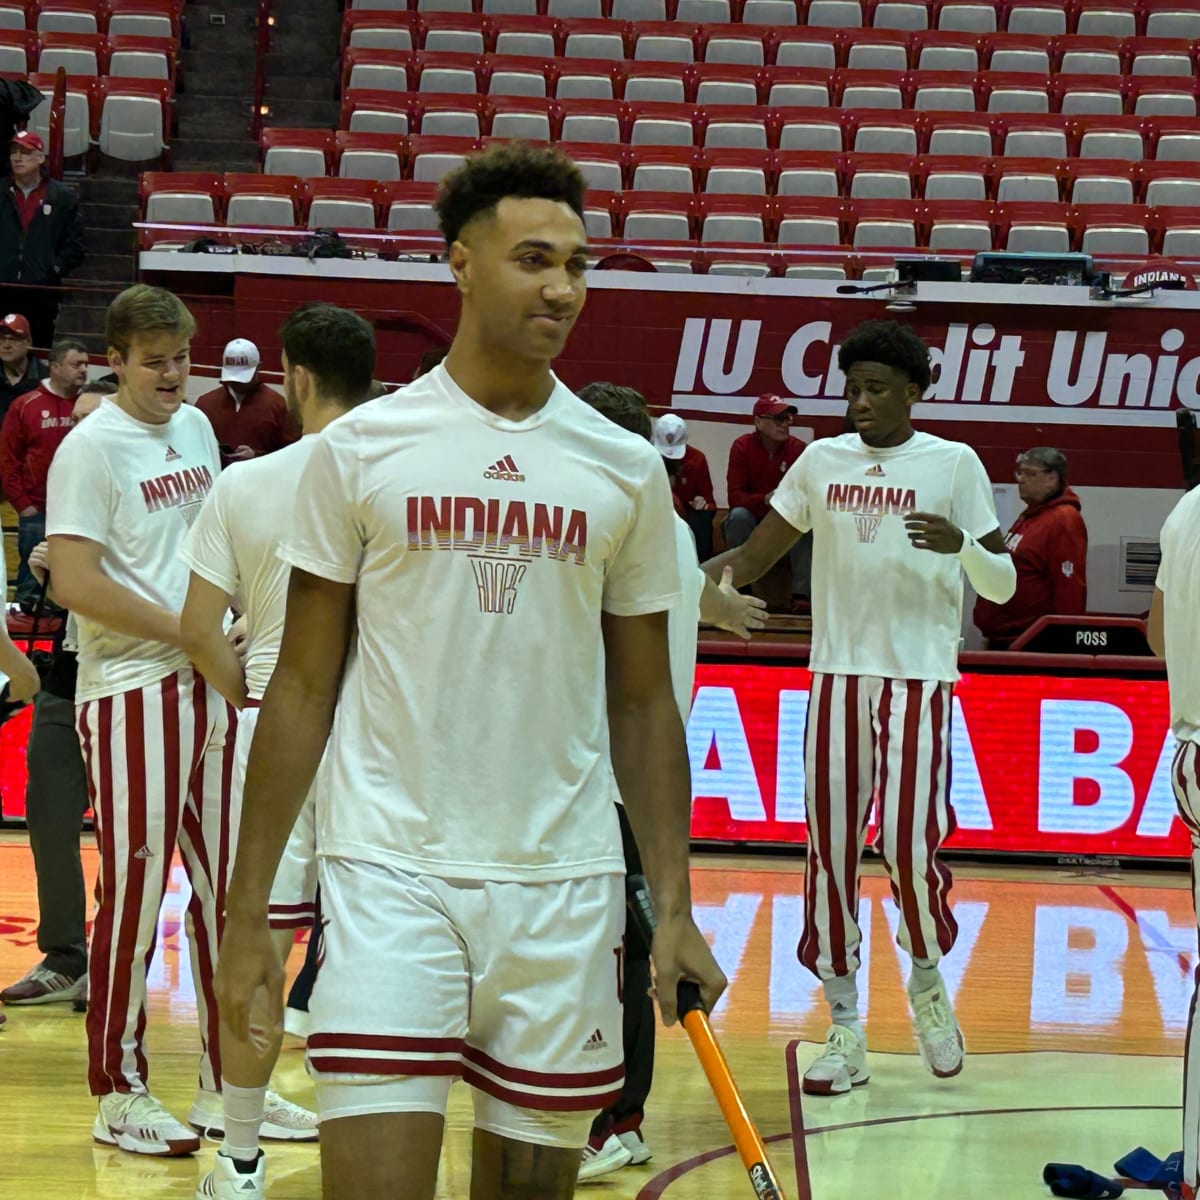 LIVE BLOG Follow the Indiana Hoosiers Game With the Northwestern Wildcats in Real Time